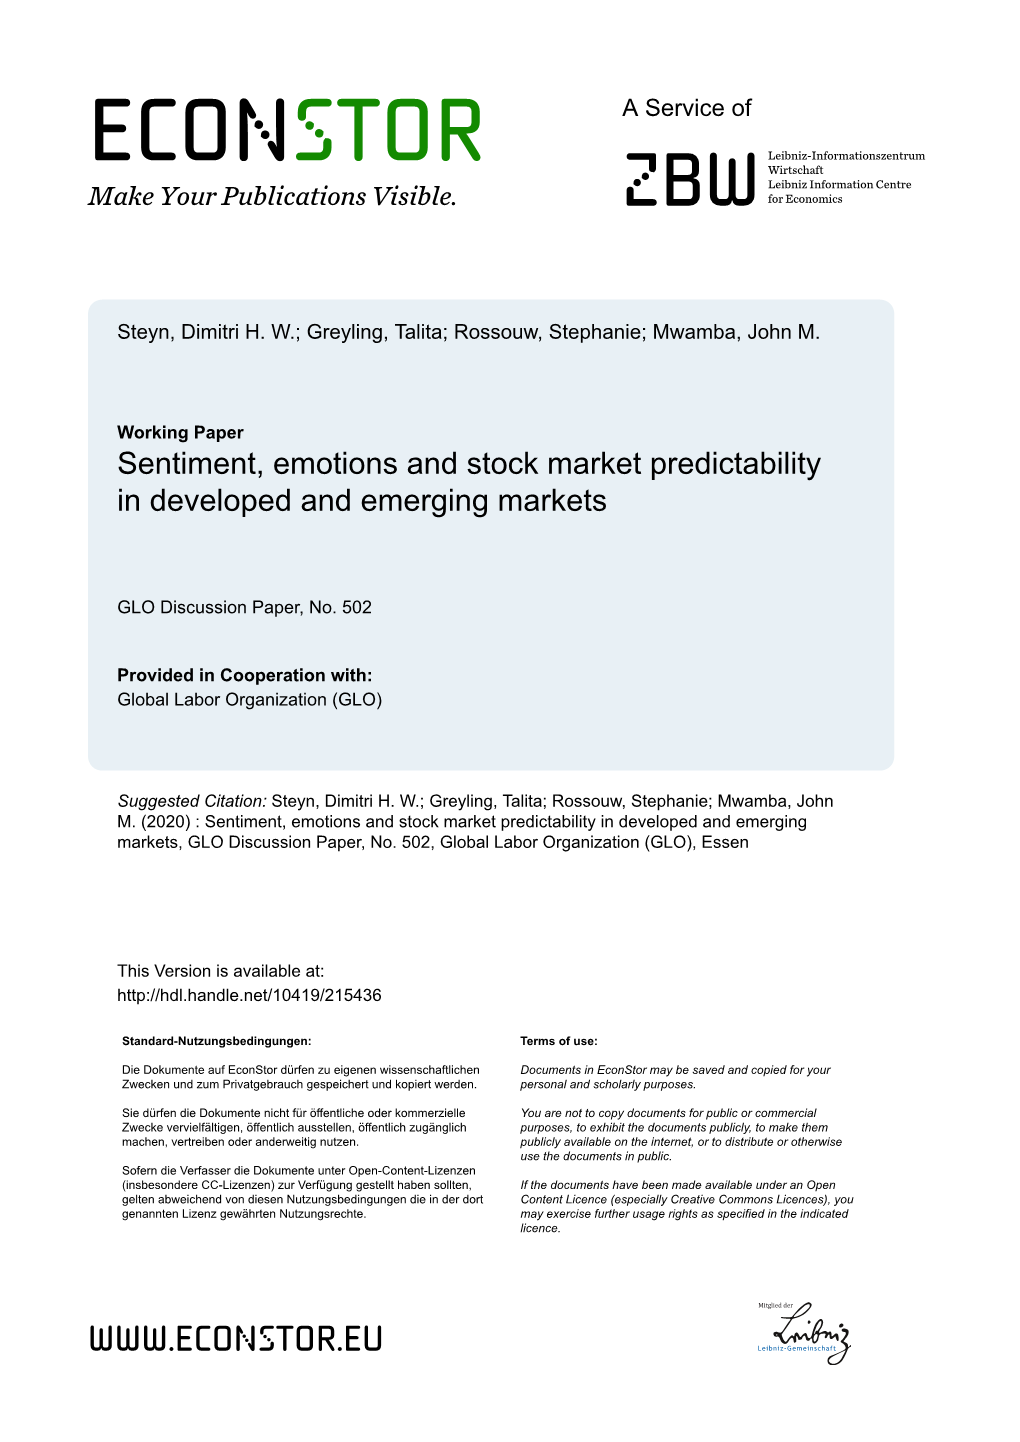 Sentiment, Emotions and Stock Market Predictability in Developed and Emerging Markets